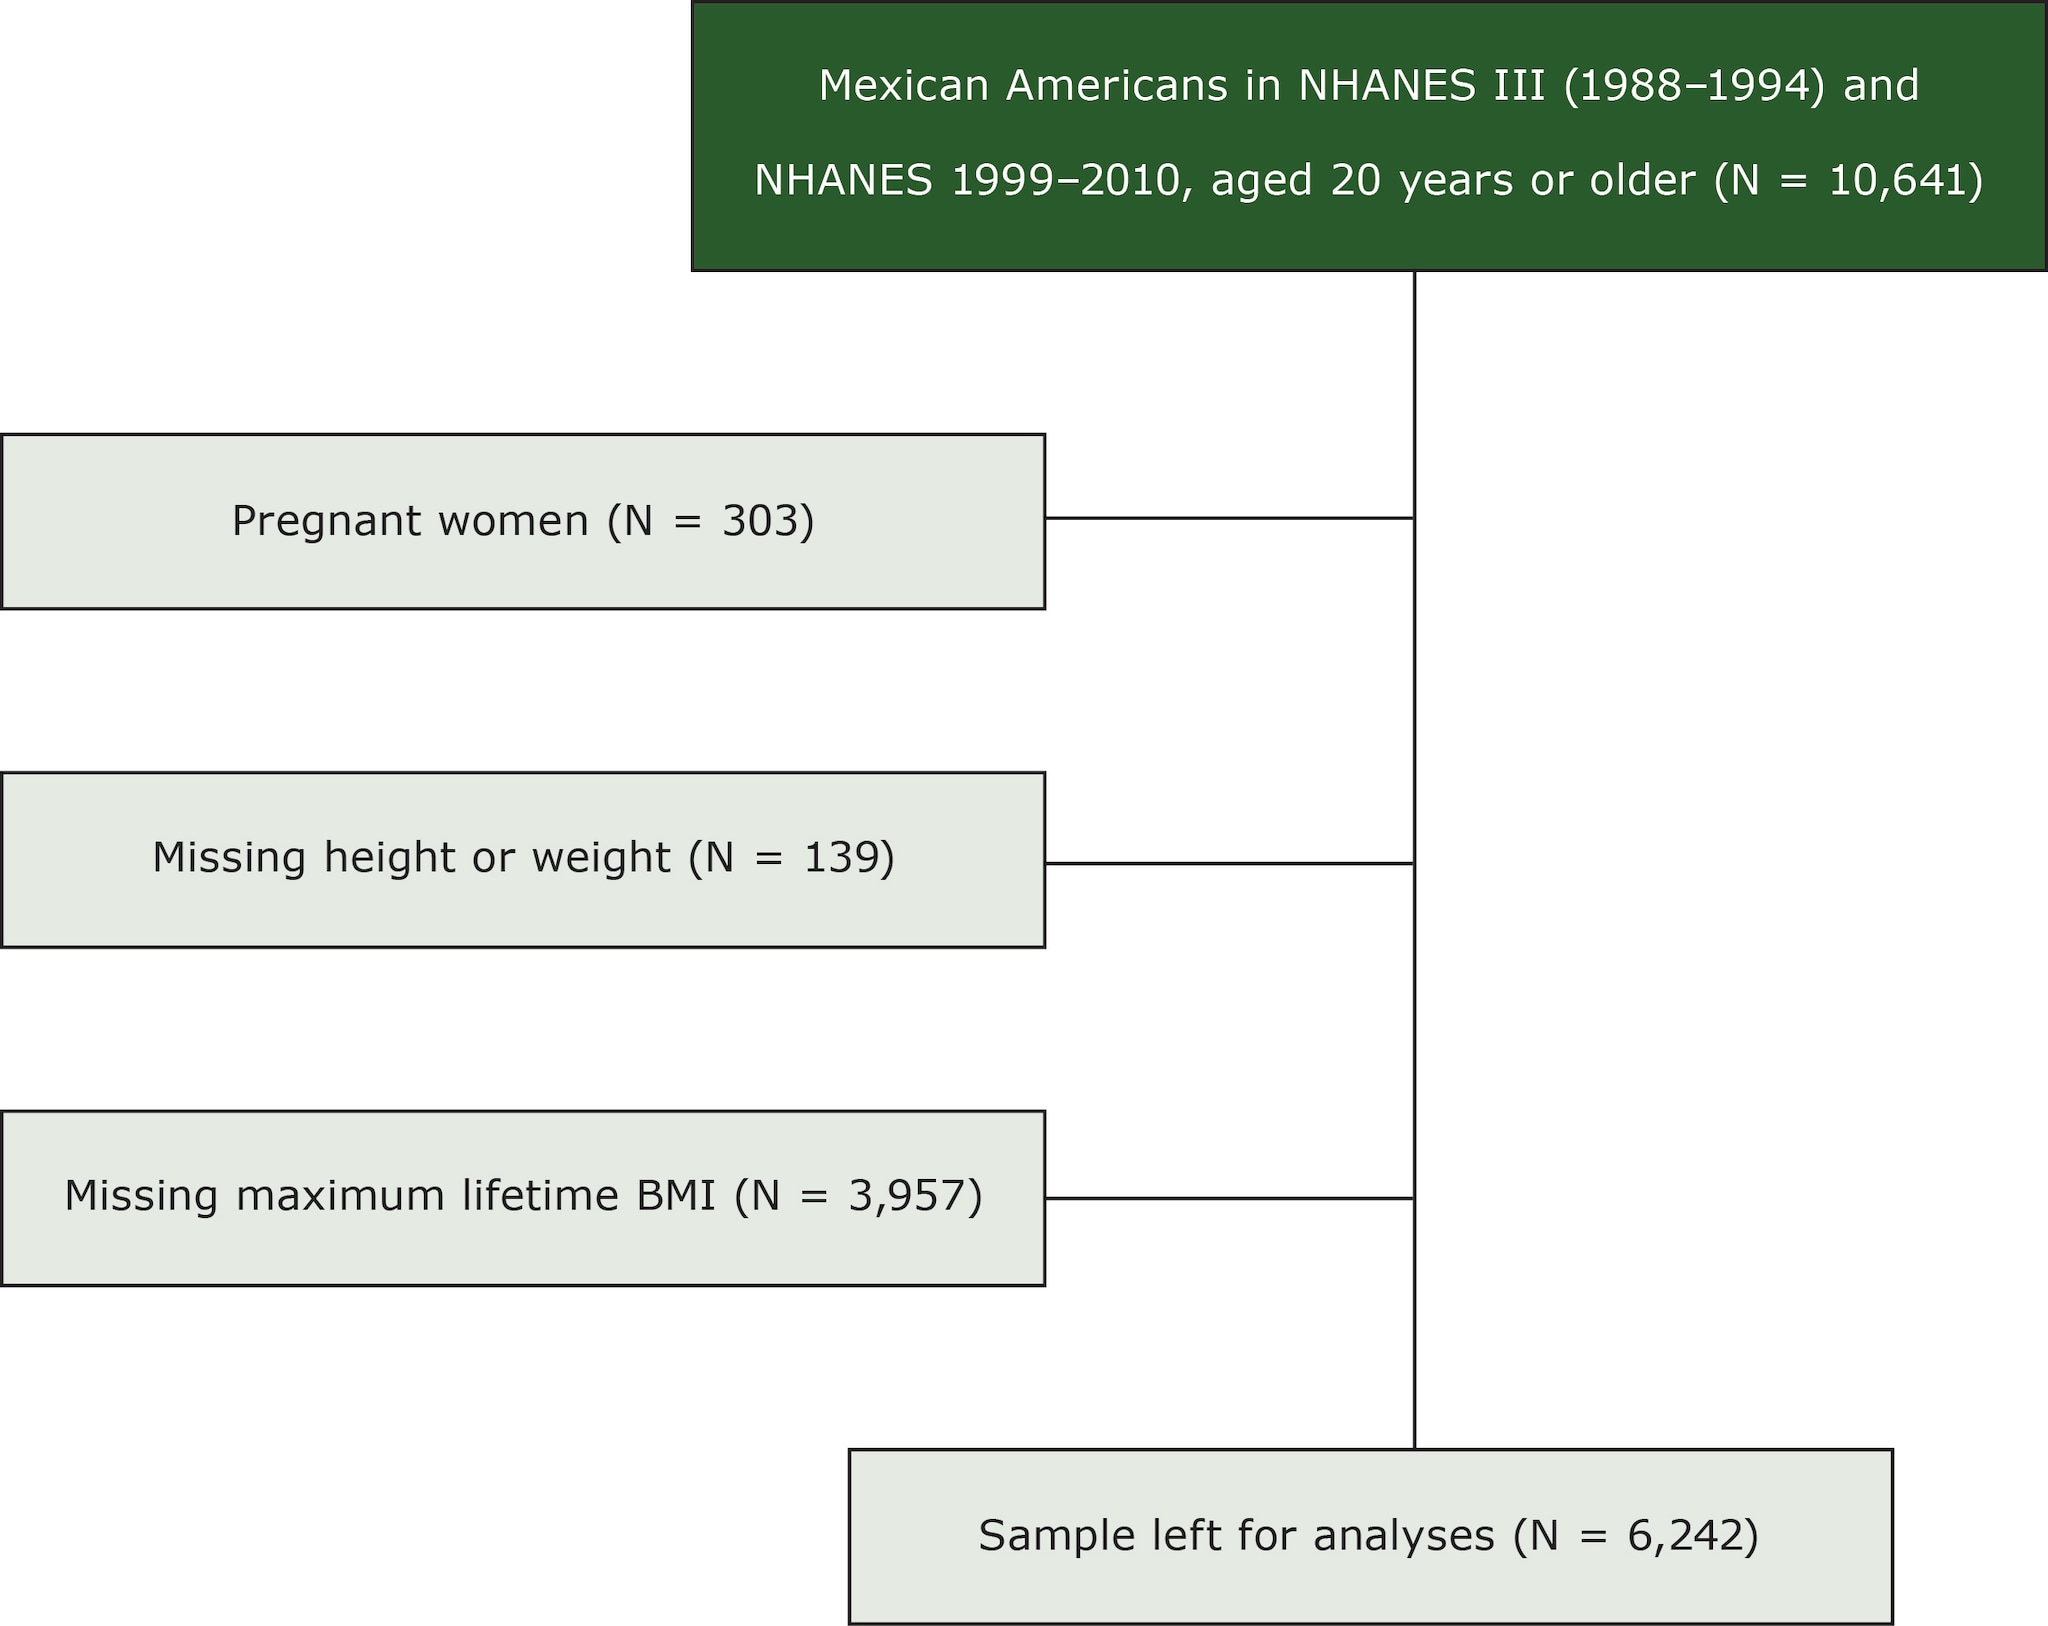 Consolidated Standards of Reporting (CONSORT) diagram describing the flow of participants selected for inclusion in the study of maximum lifetime body mass index (BMI) and all-cause and cause-specific mortality in Mexican American adults: National Health and Nutrition Examination Survey (NHANES) III, (1988–1994) and 1999–2010. Pregnant women and those missing height, weight, or maximum lifetime body mass index were excluded.